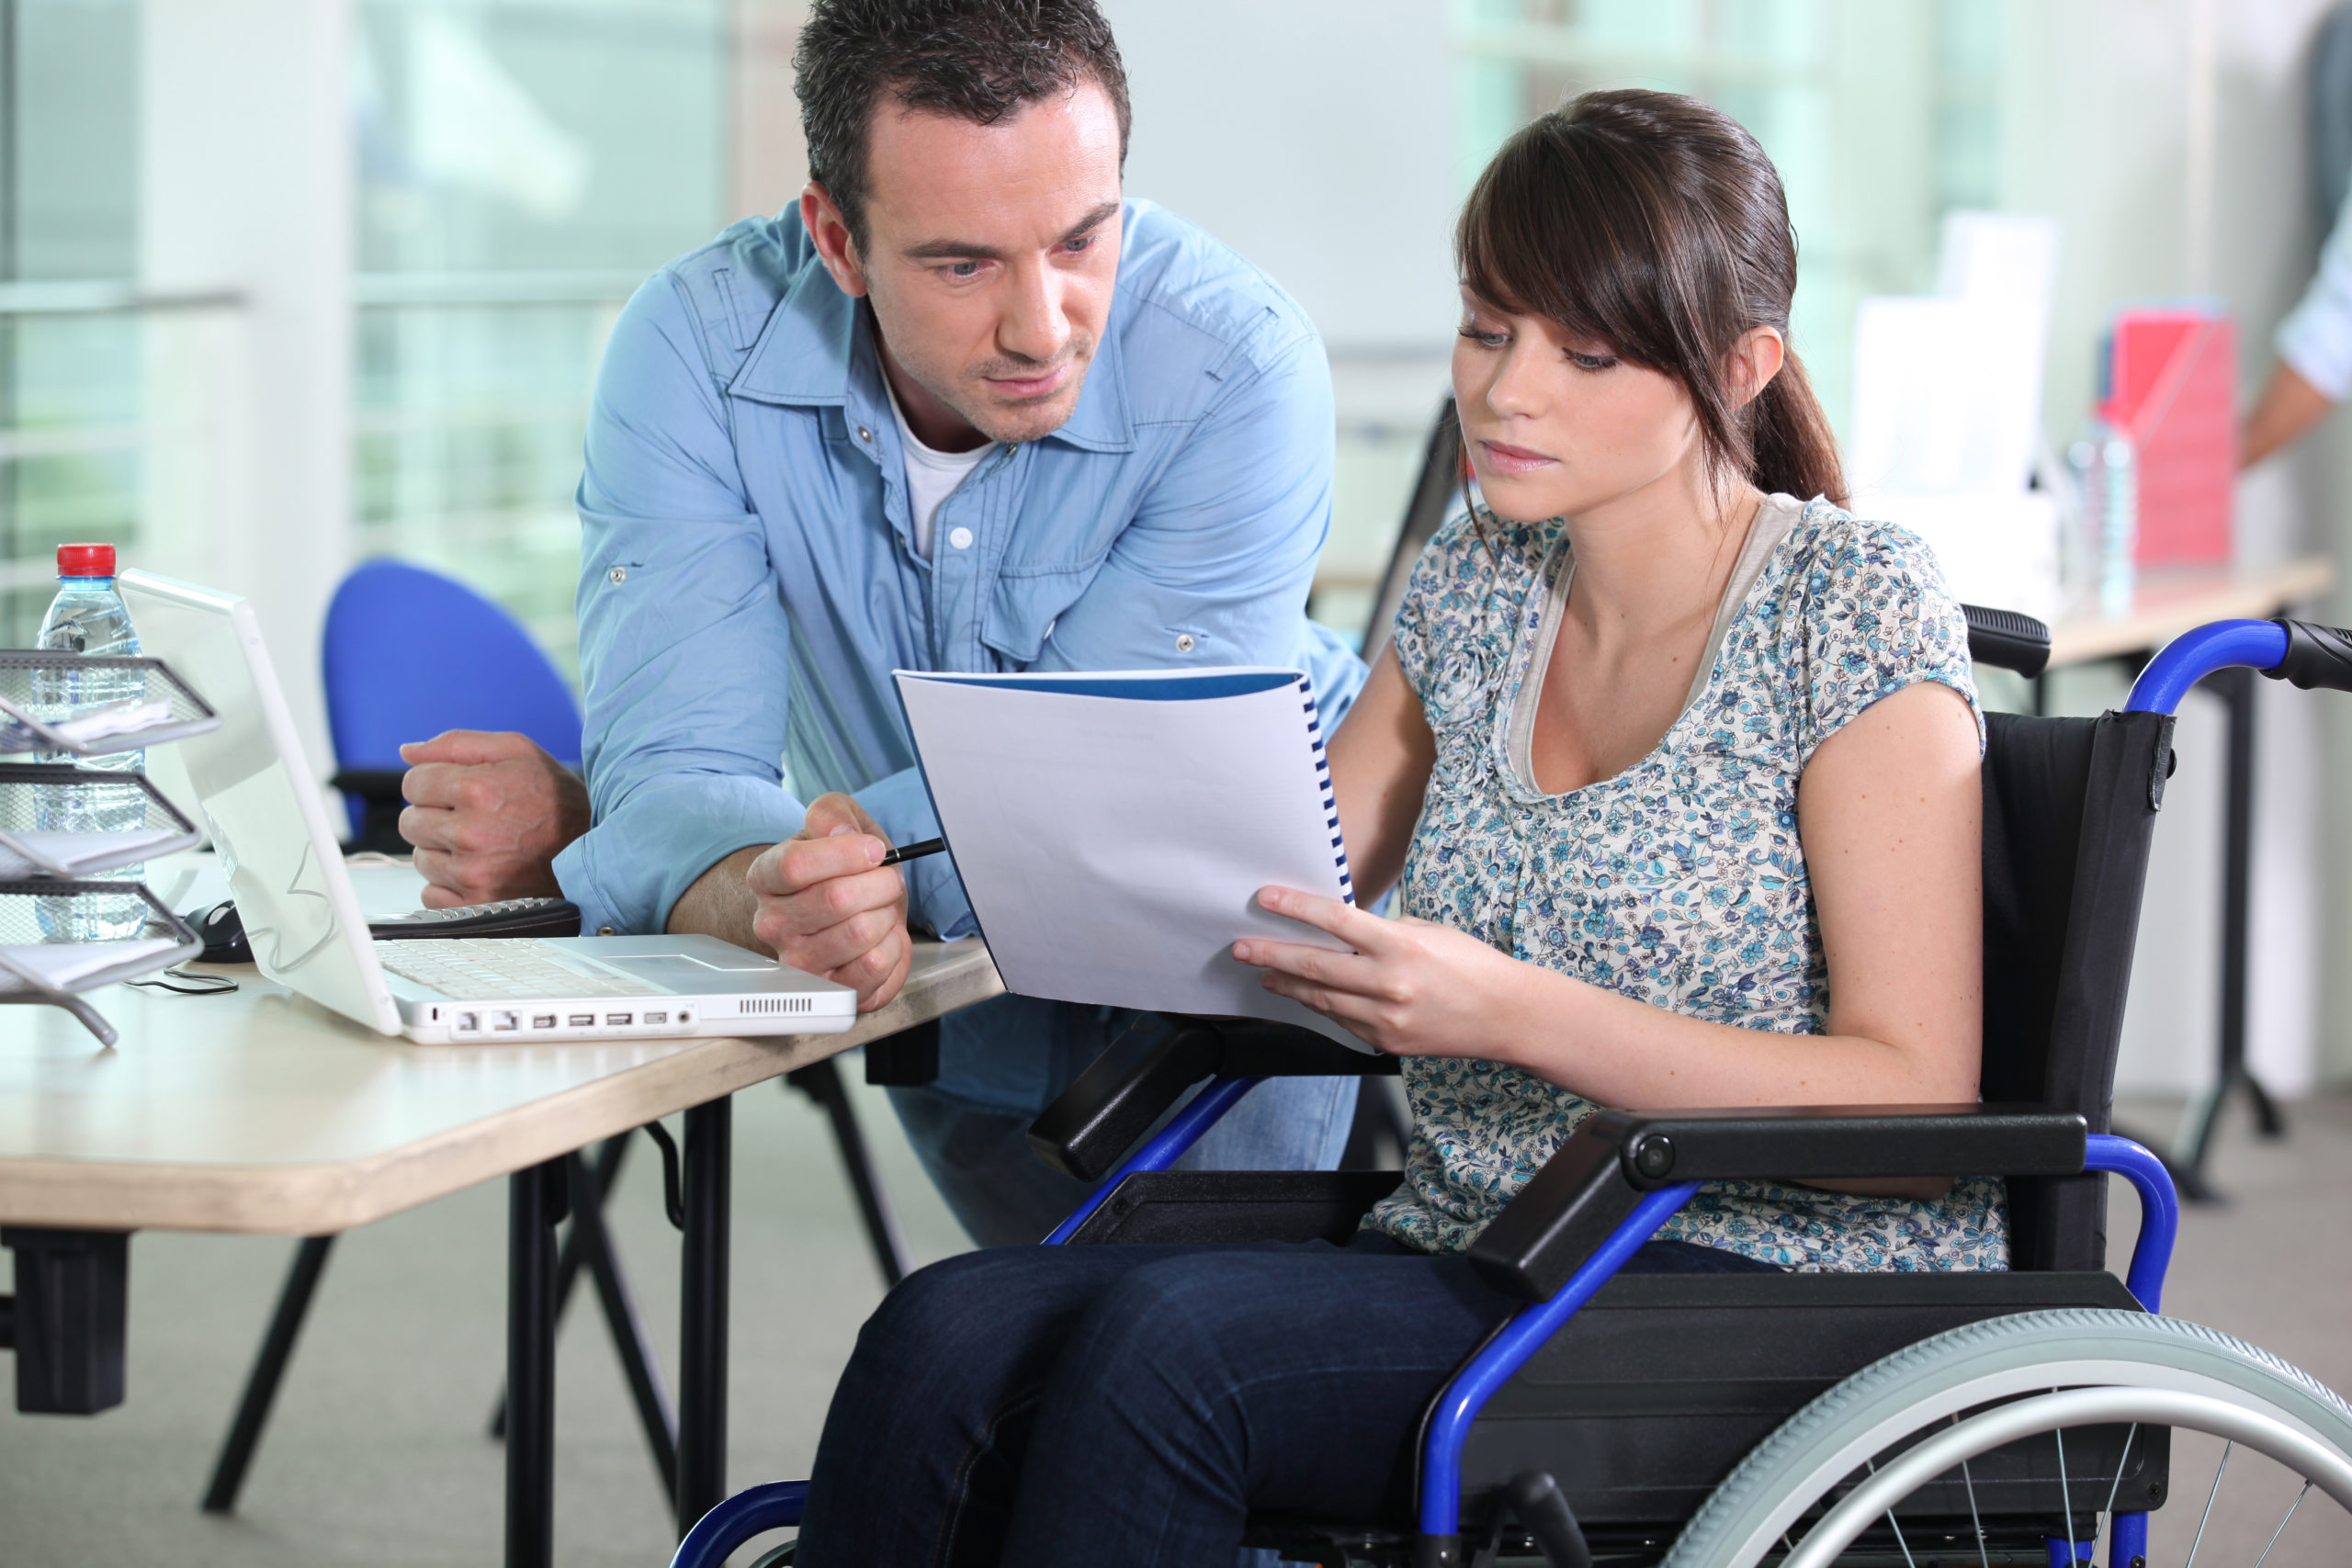 Wheel chair user going over notes with a colleague in the workplace